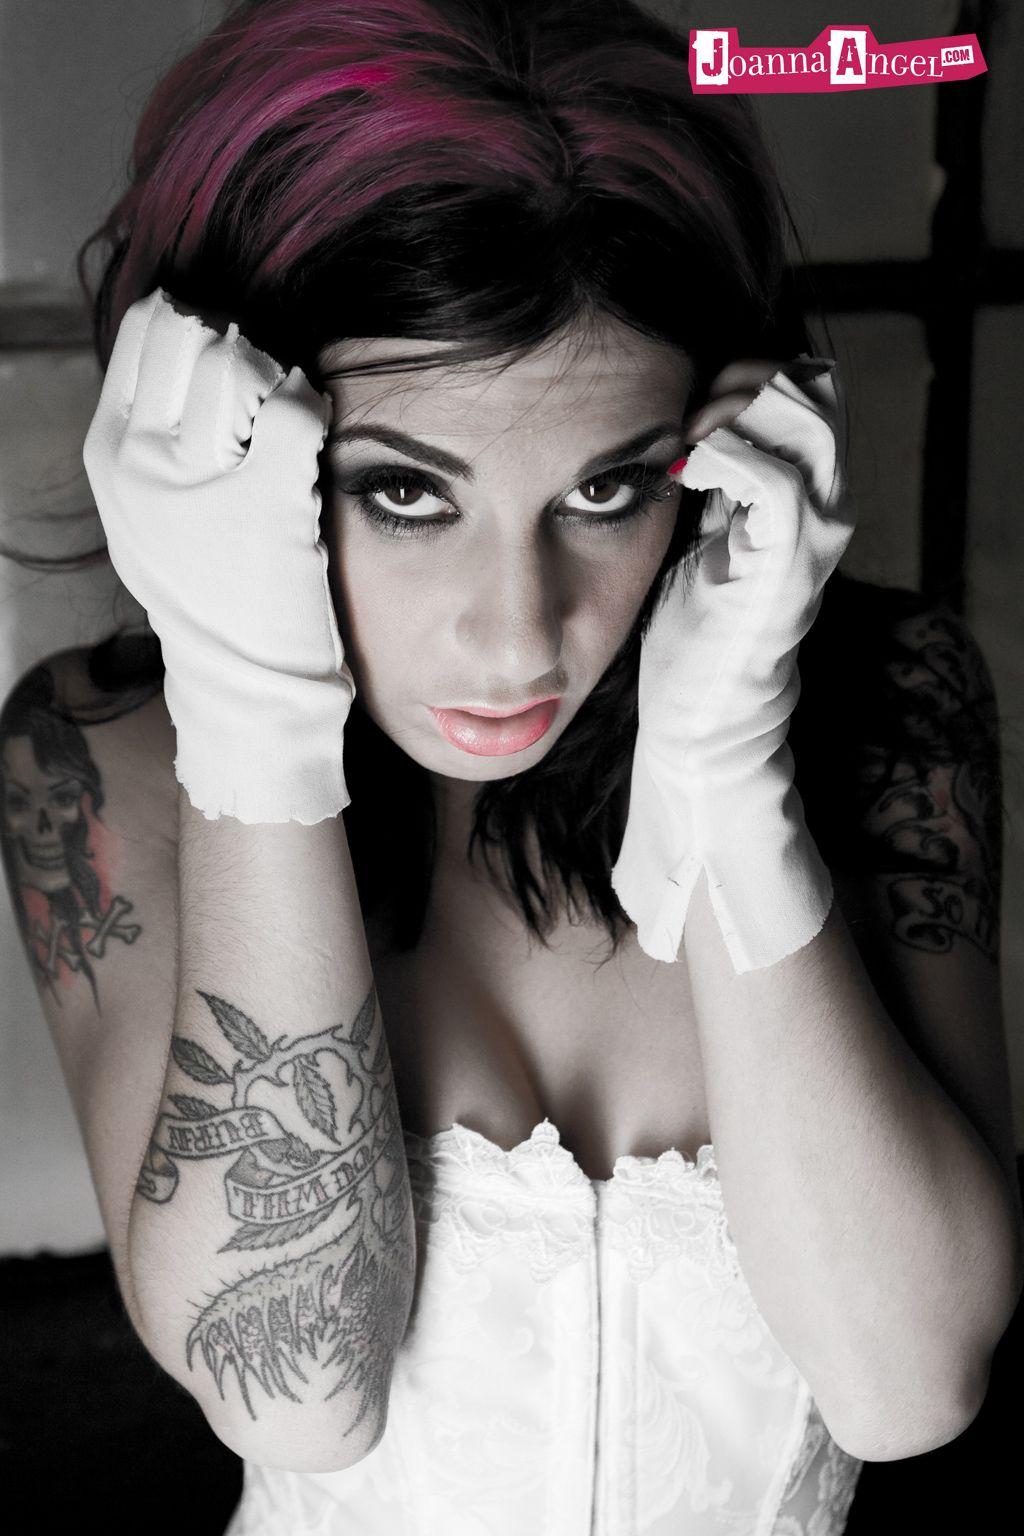 Pictures of Joanna Angel giving you some b&w gothic glam #55529998